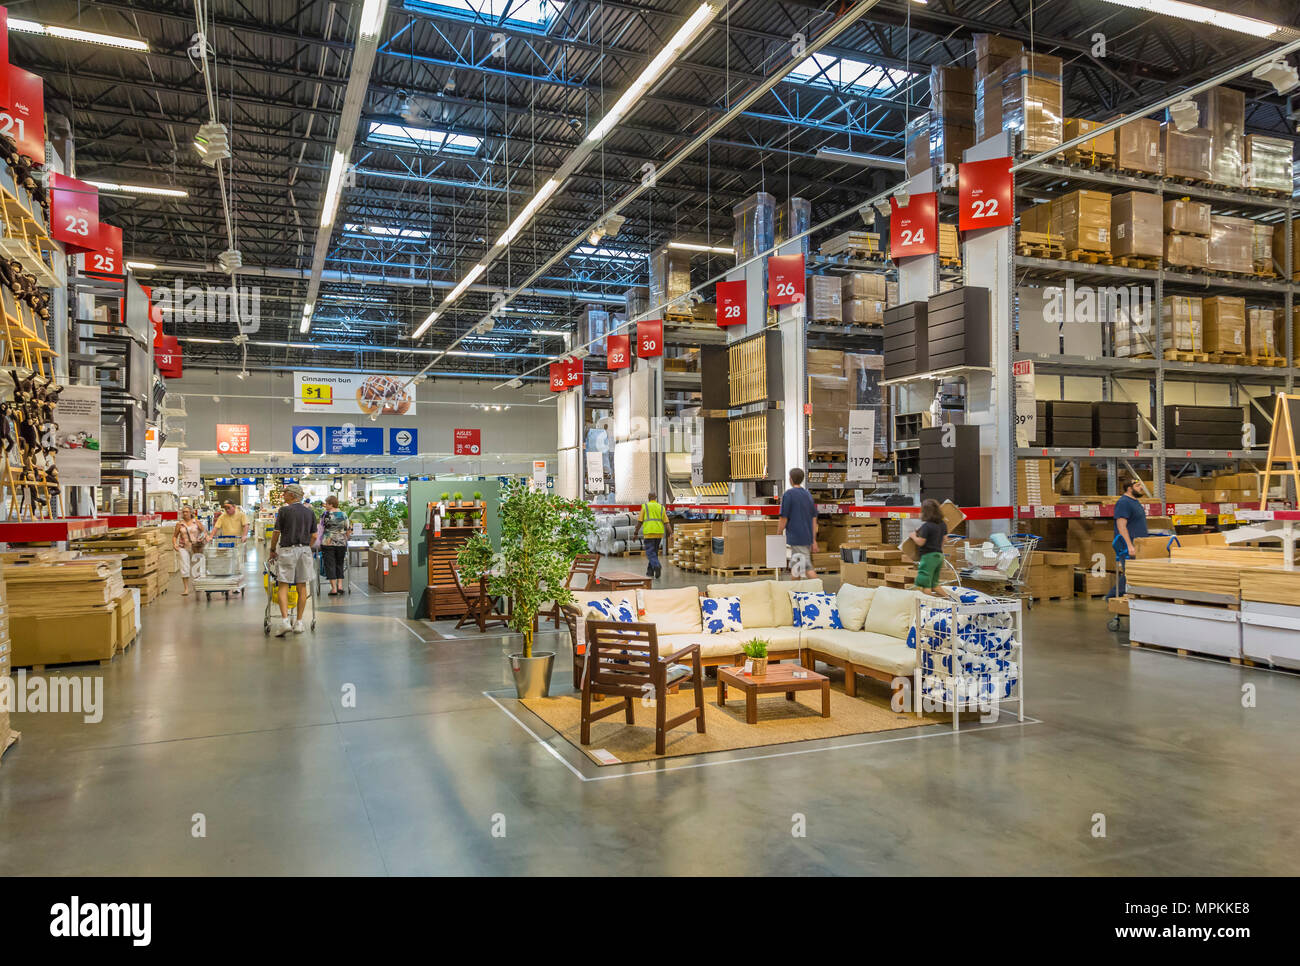 Customers picking up their selections in the warehouse area inside an Ikea store in the US Stock Photo